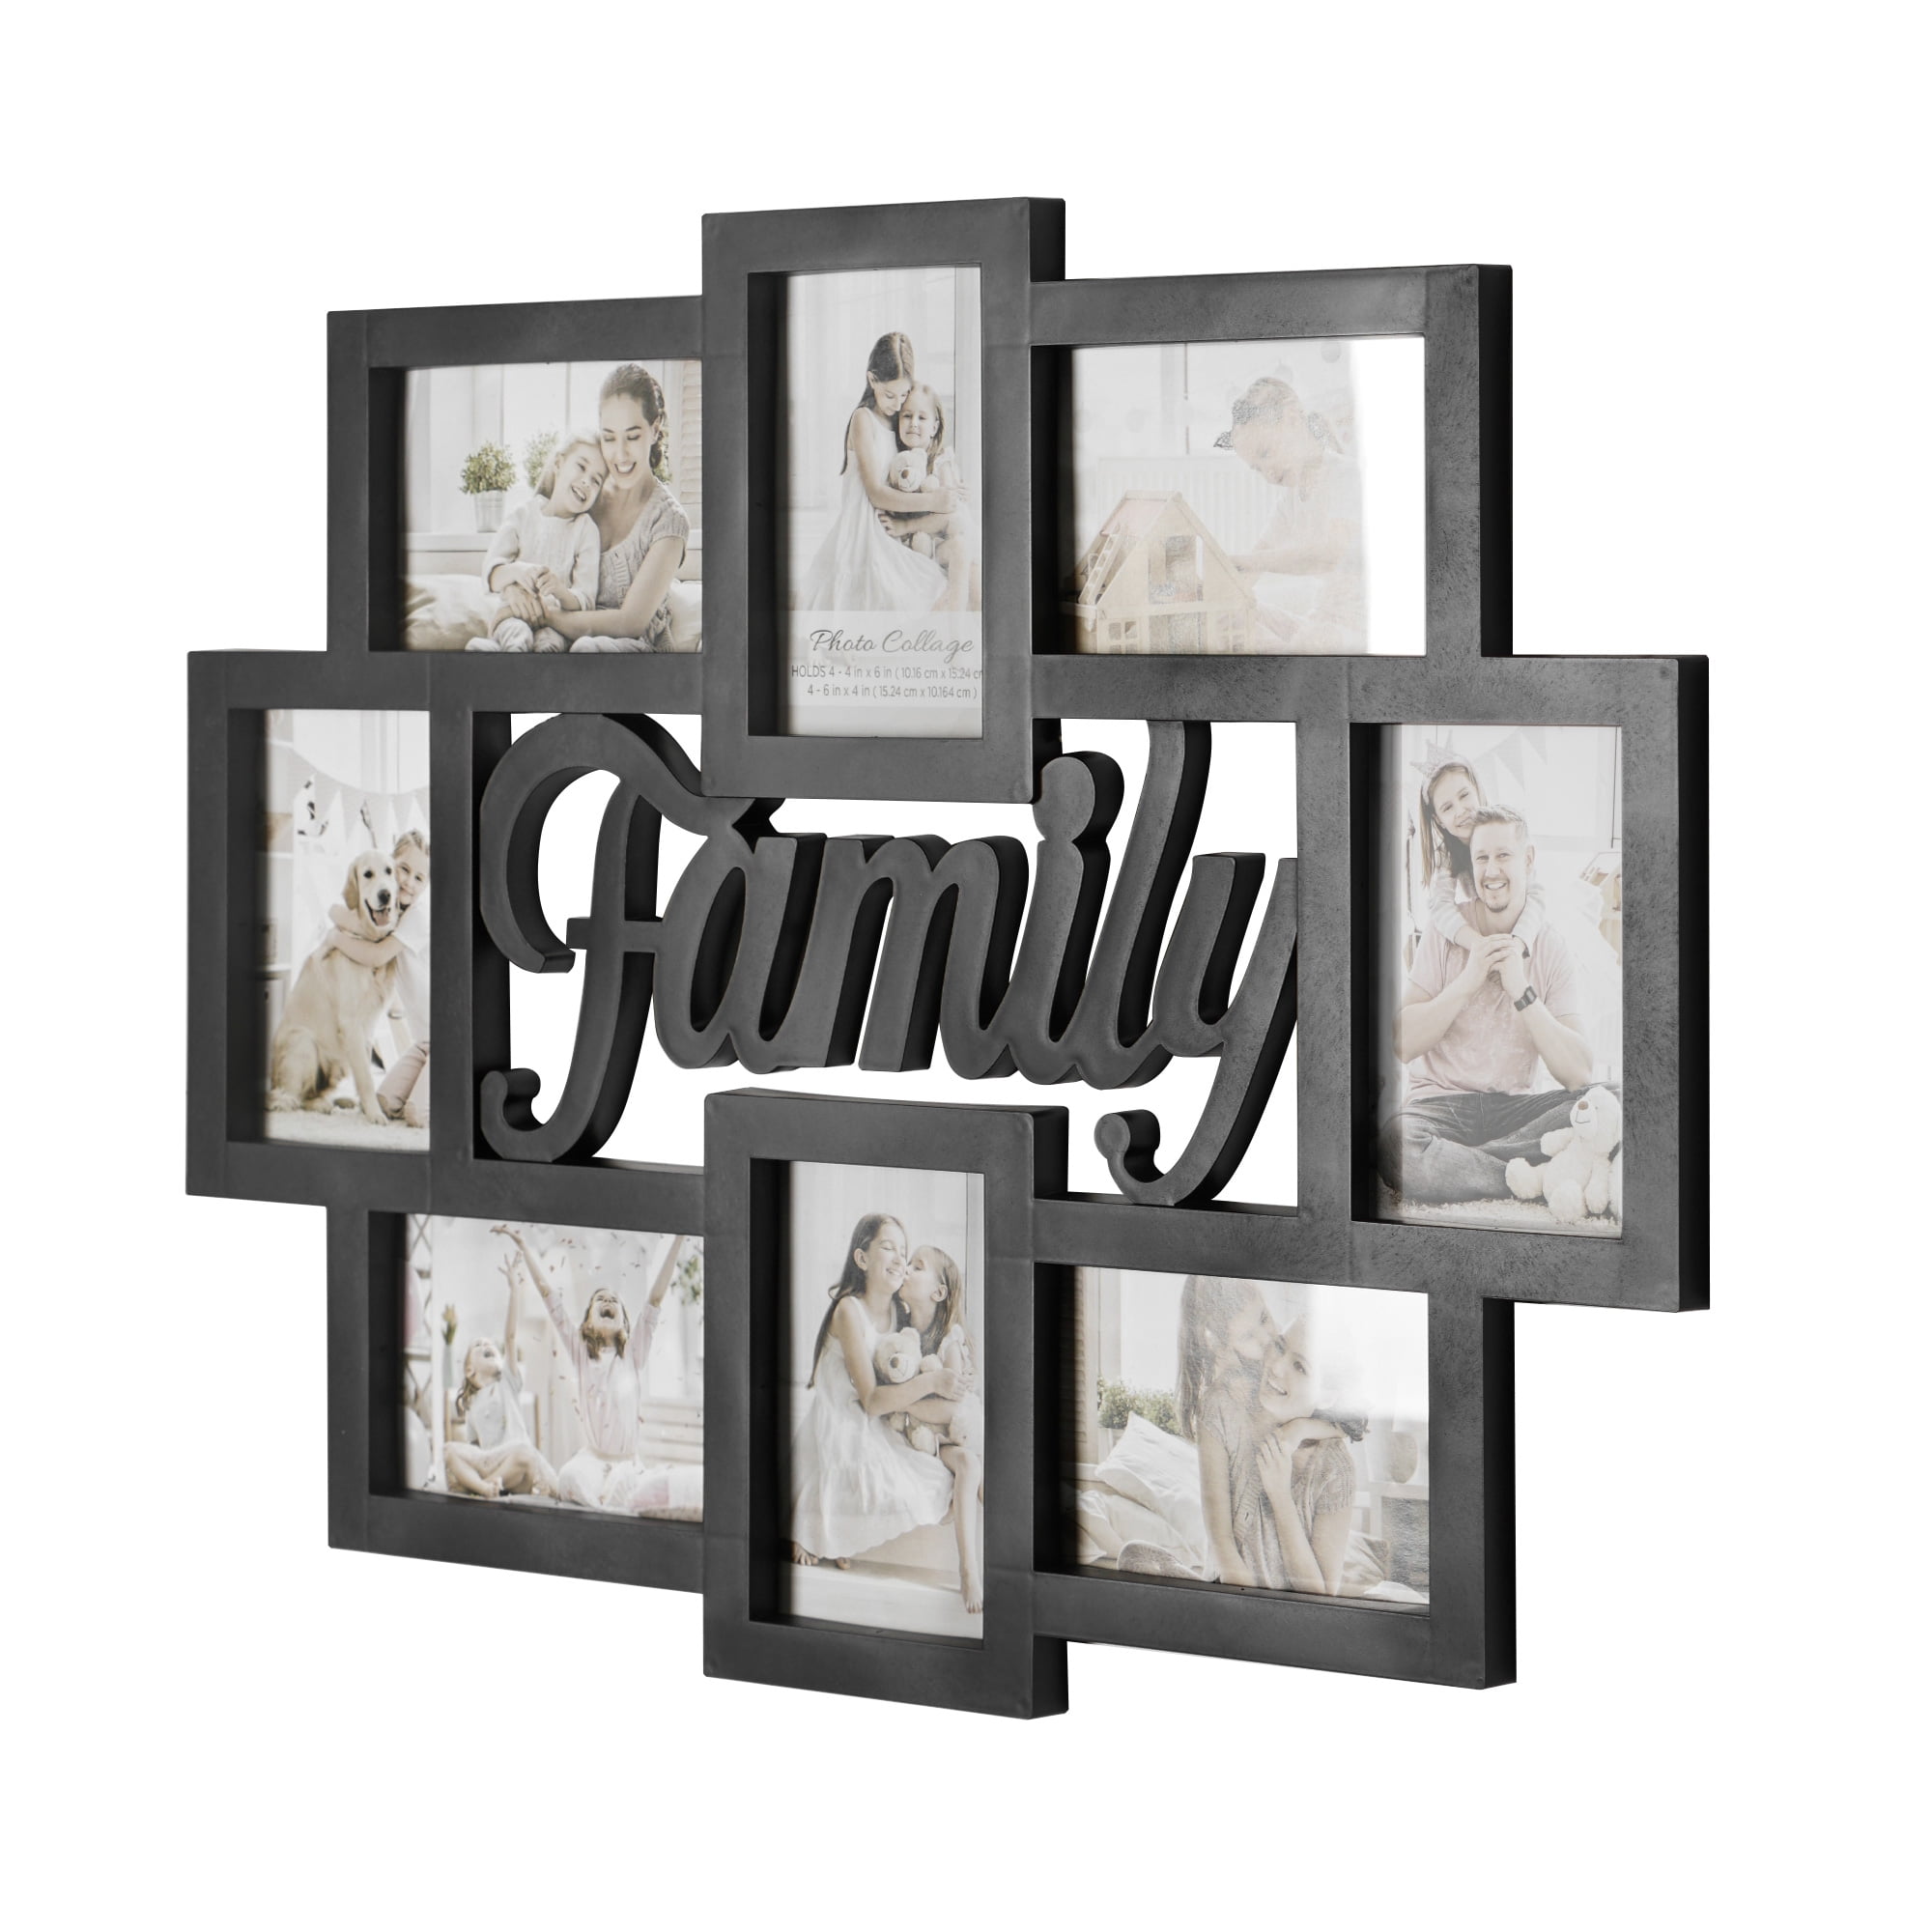 Office/Family Wall Hanging Wood Gallery Collage Picture Photo Frames Set 26 Pcs 